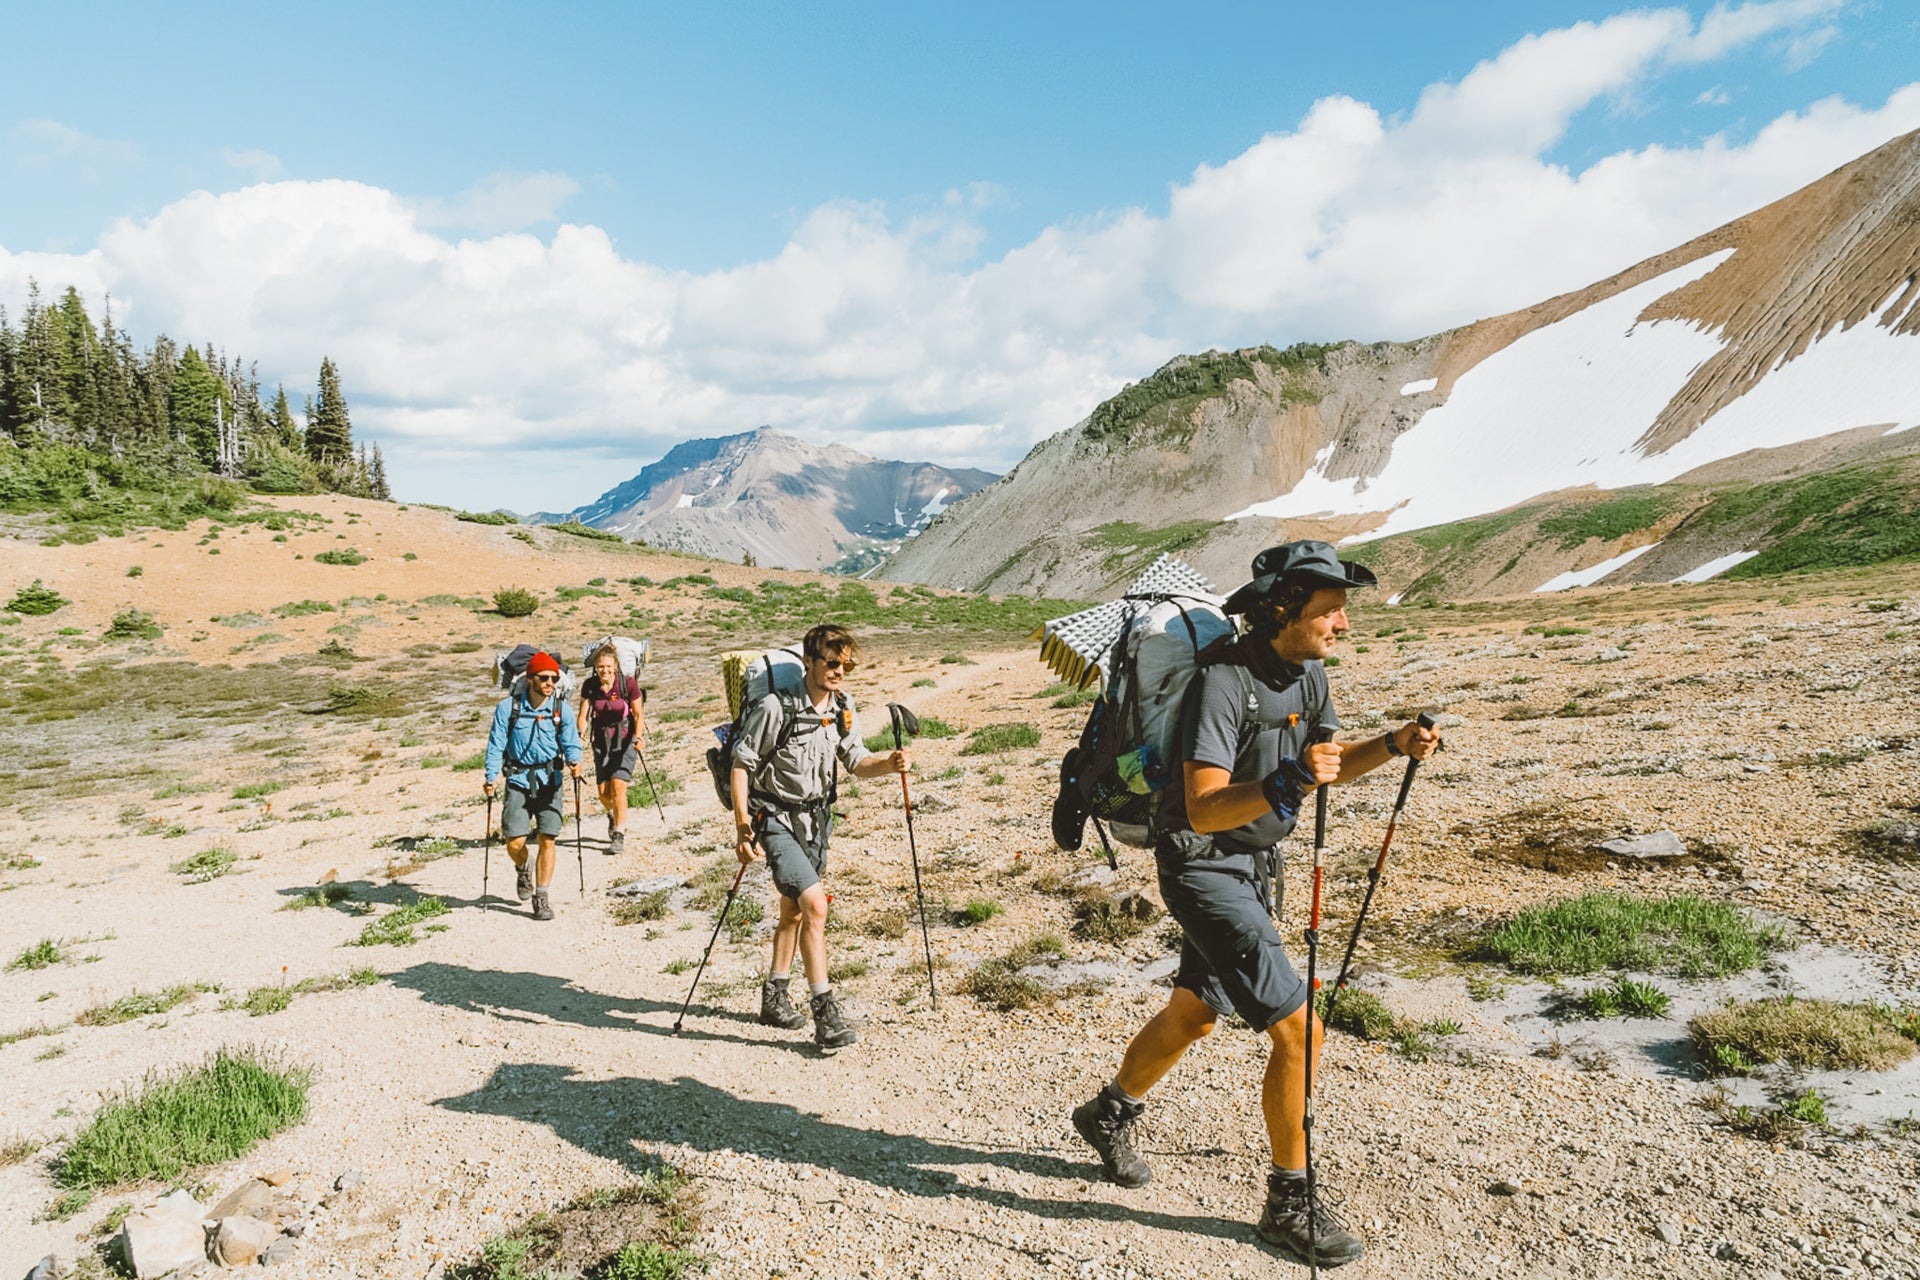 A group of hikers on a trail in the mountains.